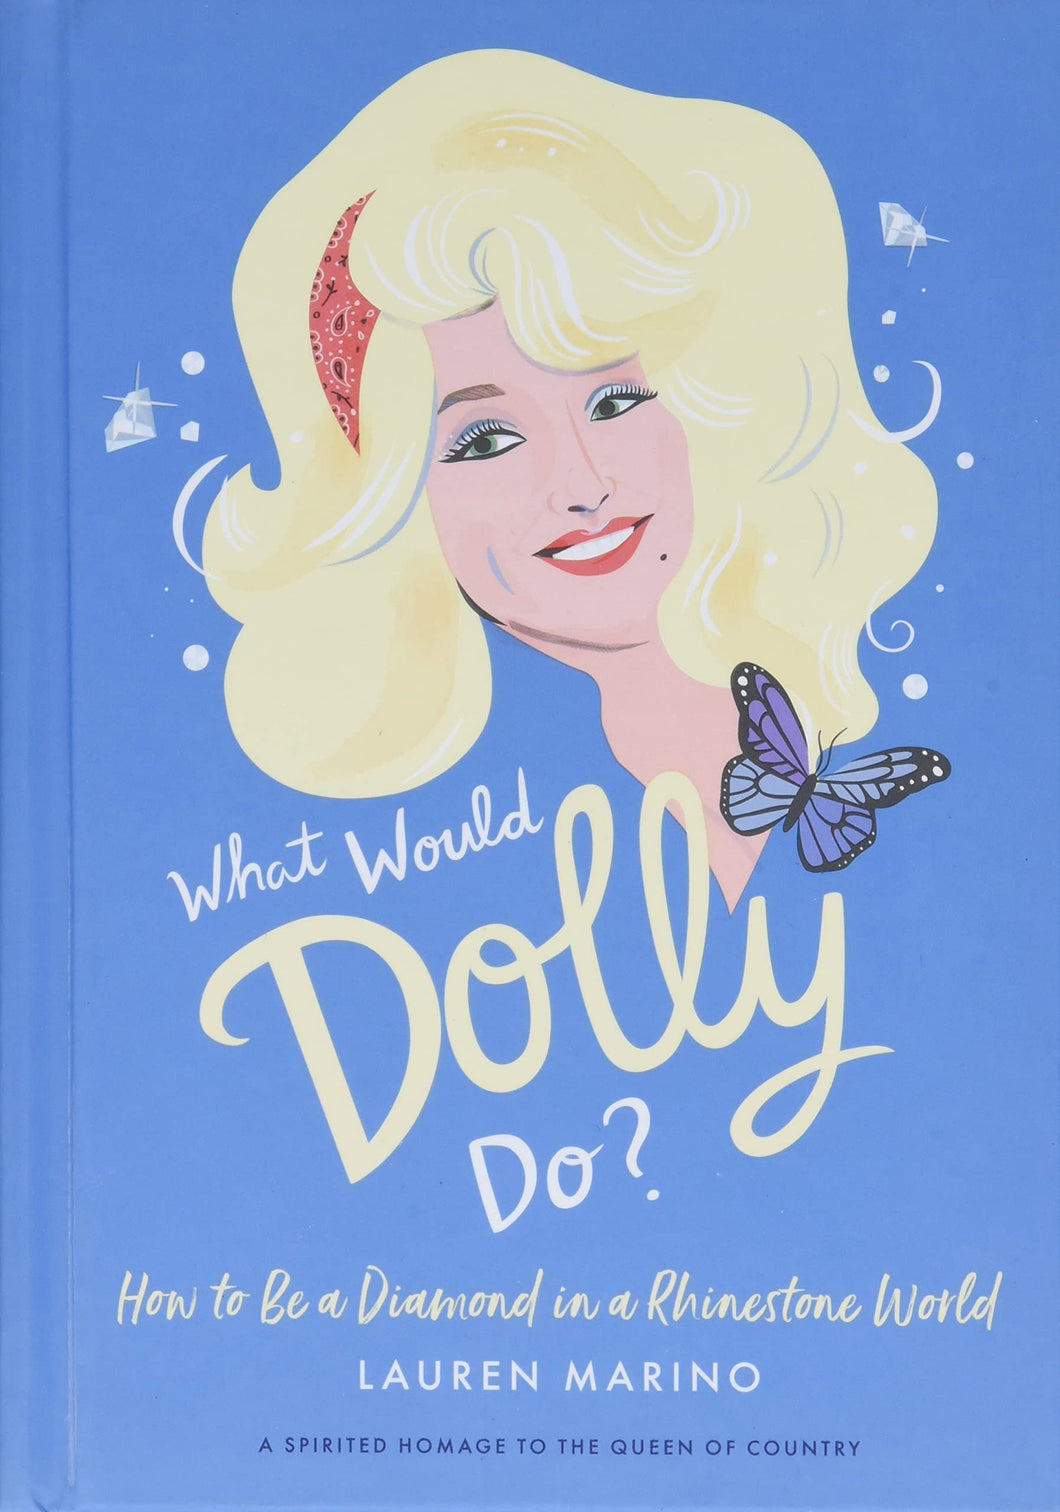 What Would Dolly Do?: How to Be a Diamond in a Rhinestone World [Lauren Marino]